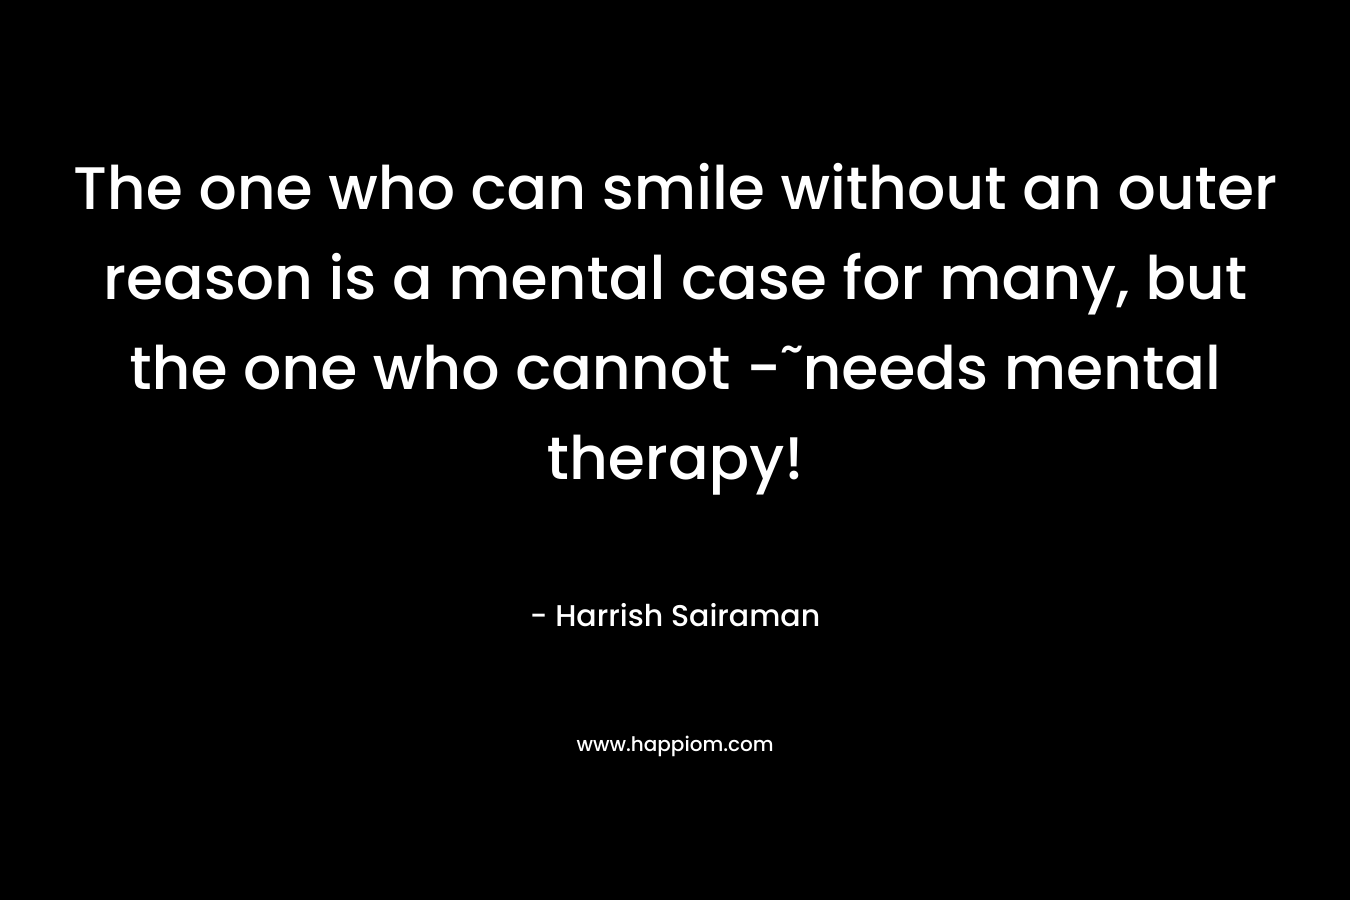 The one who can smile without an outer reason is a mental case for many, but the one who cannot -˜needs mental therapy!